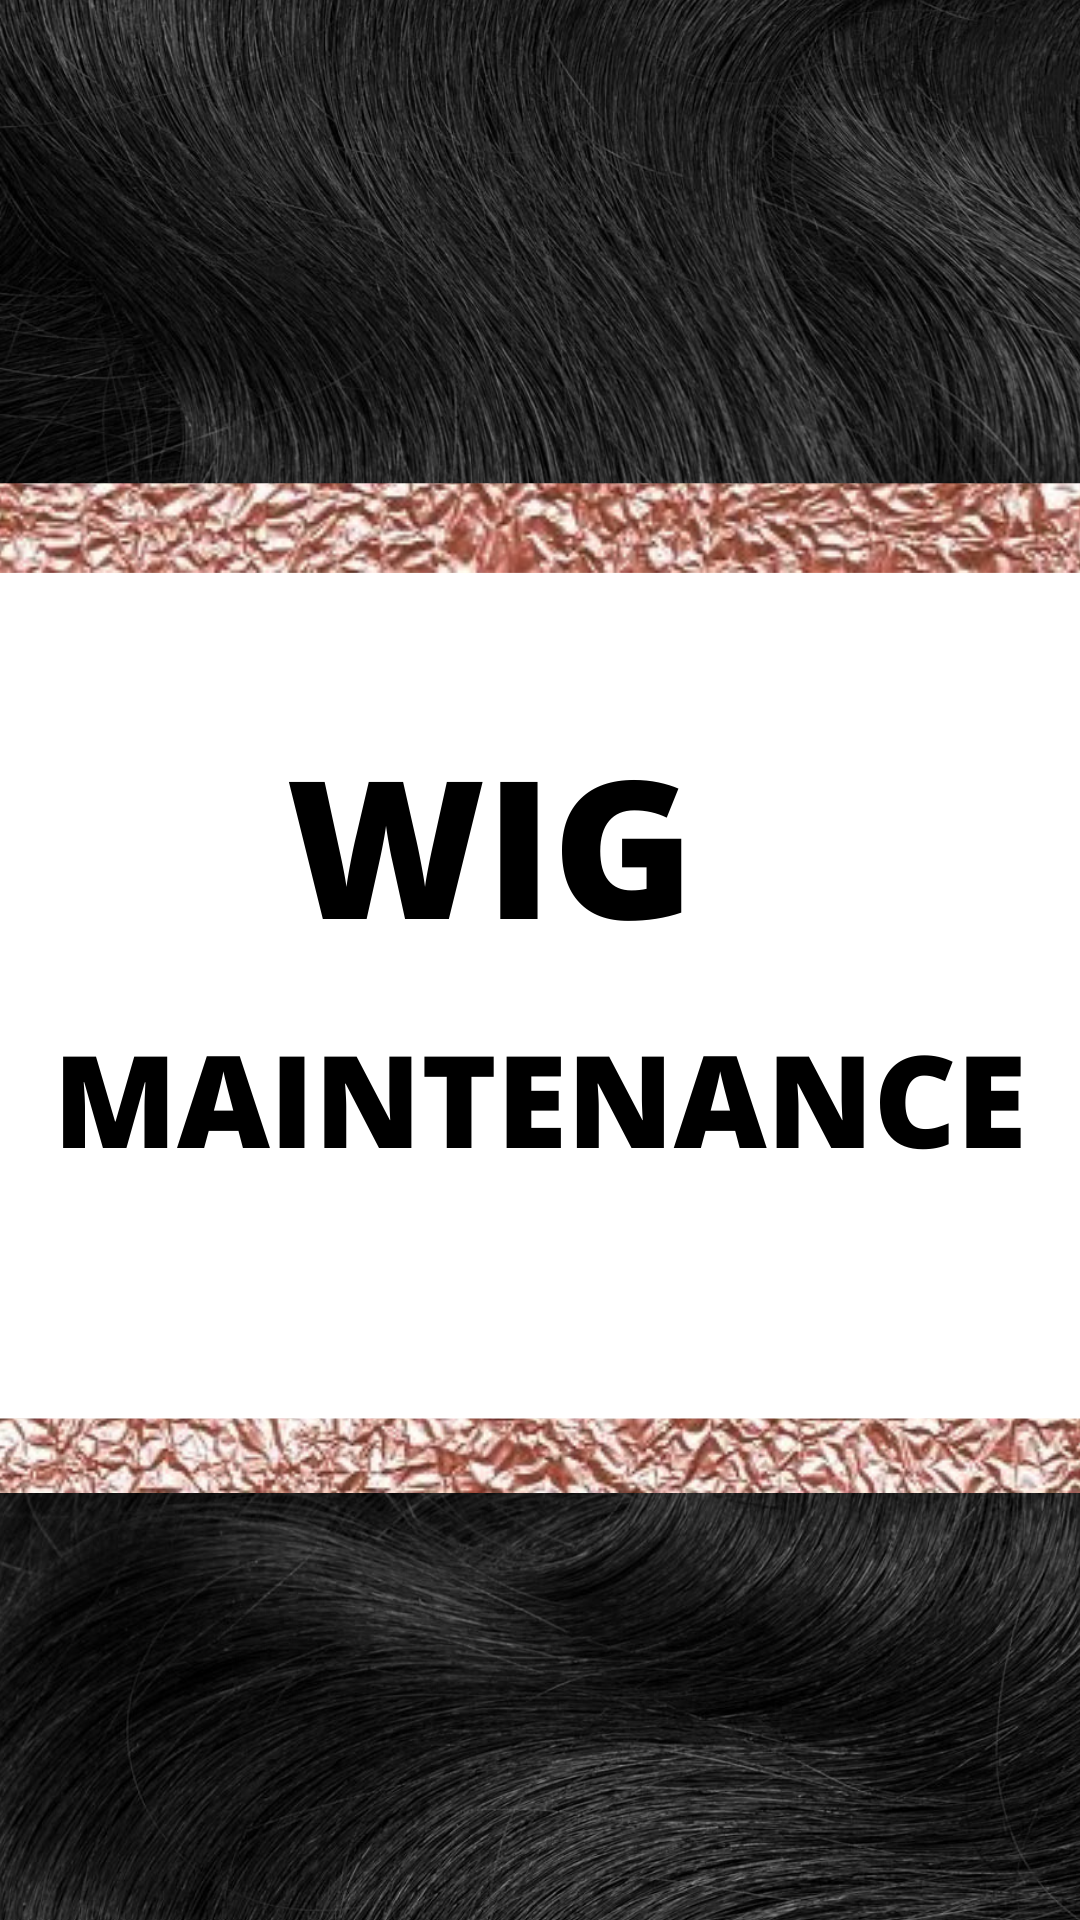 Send In Your Wig MAINTENANCE